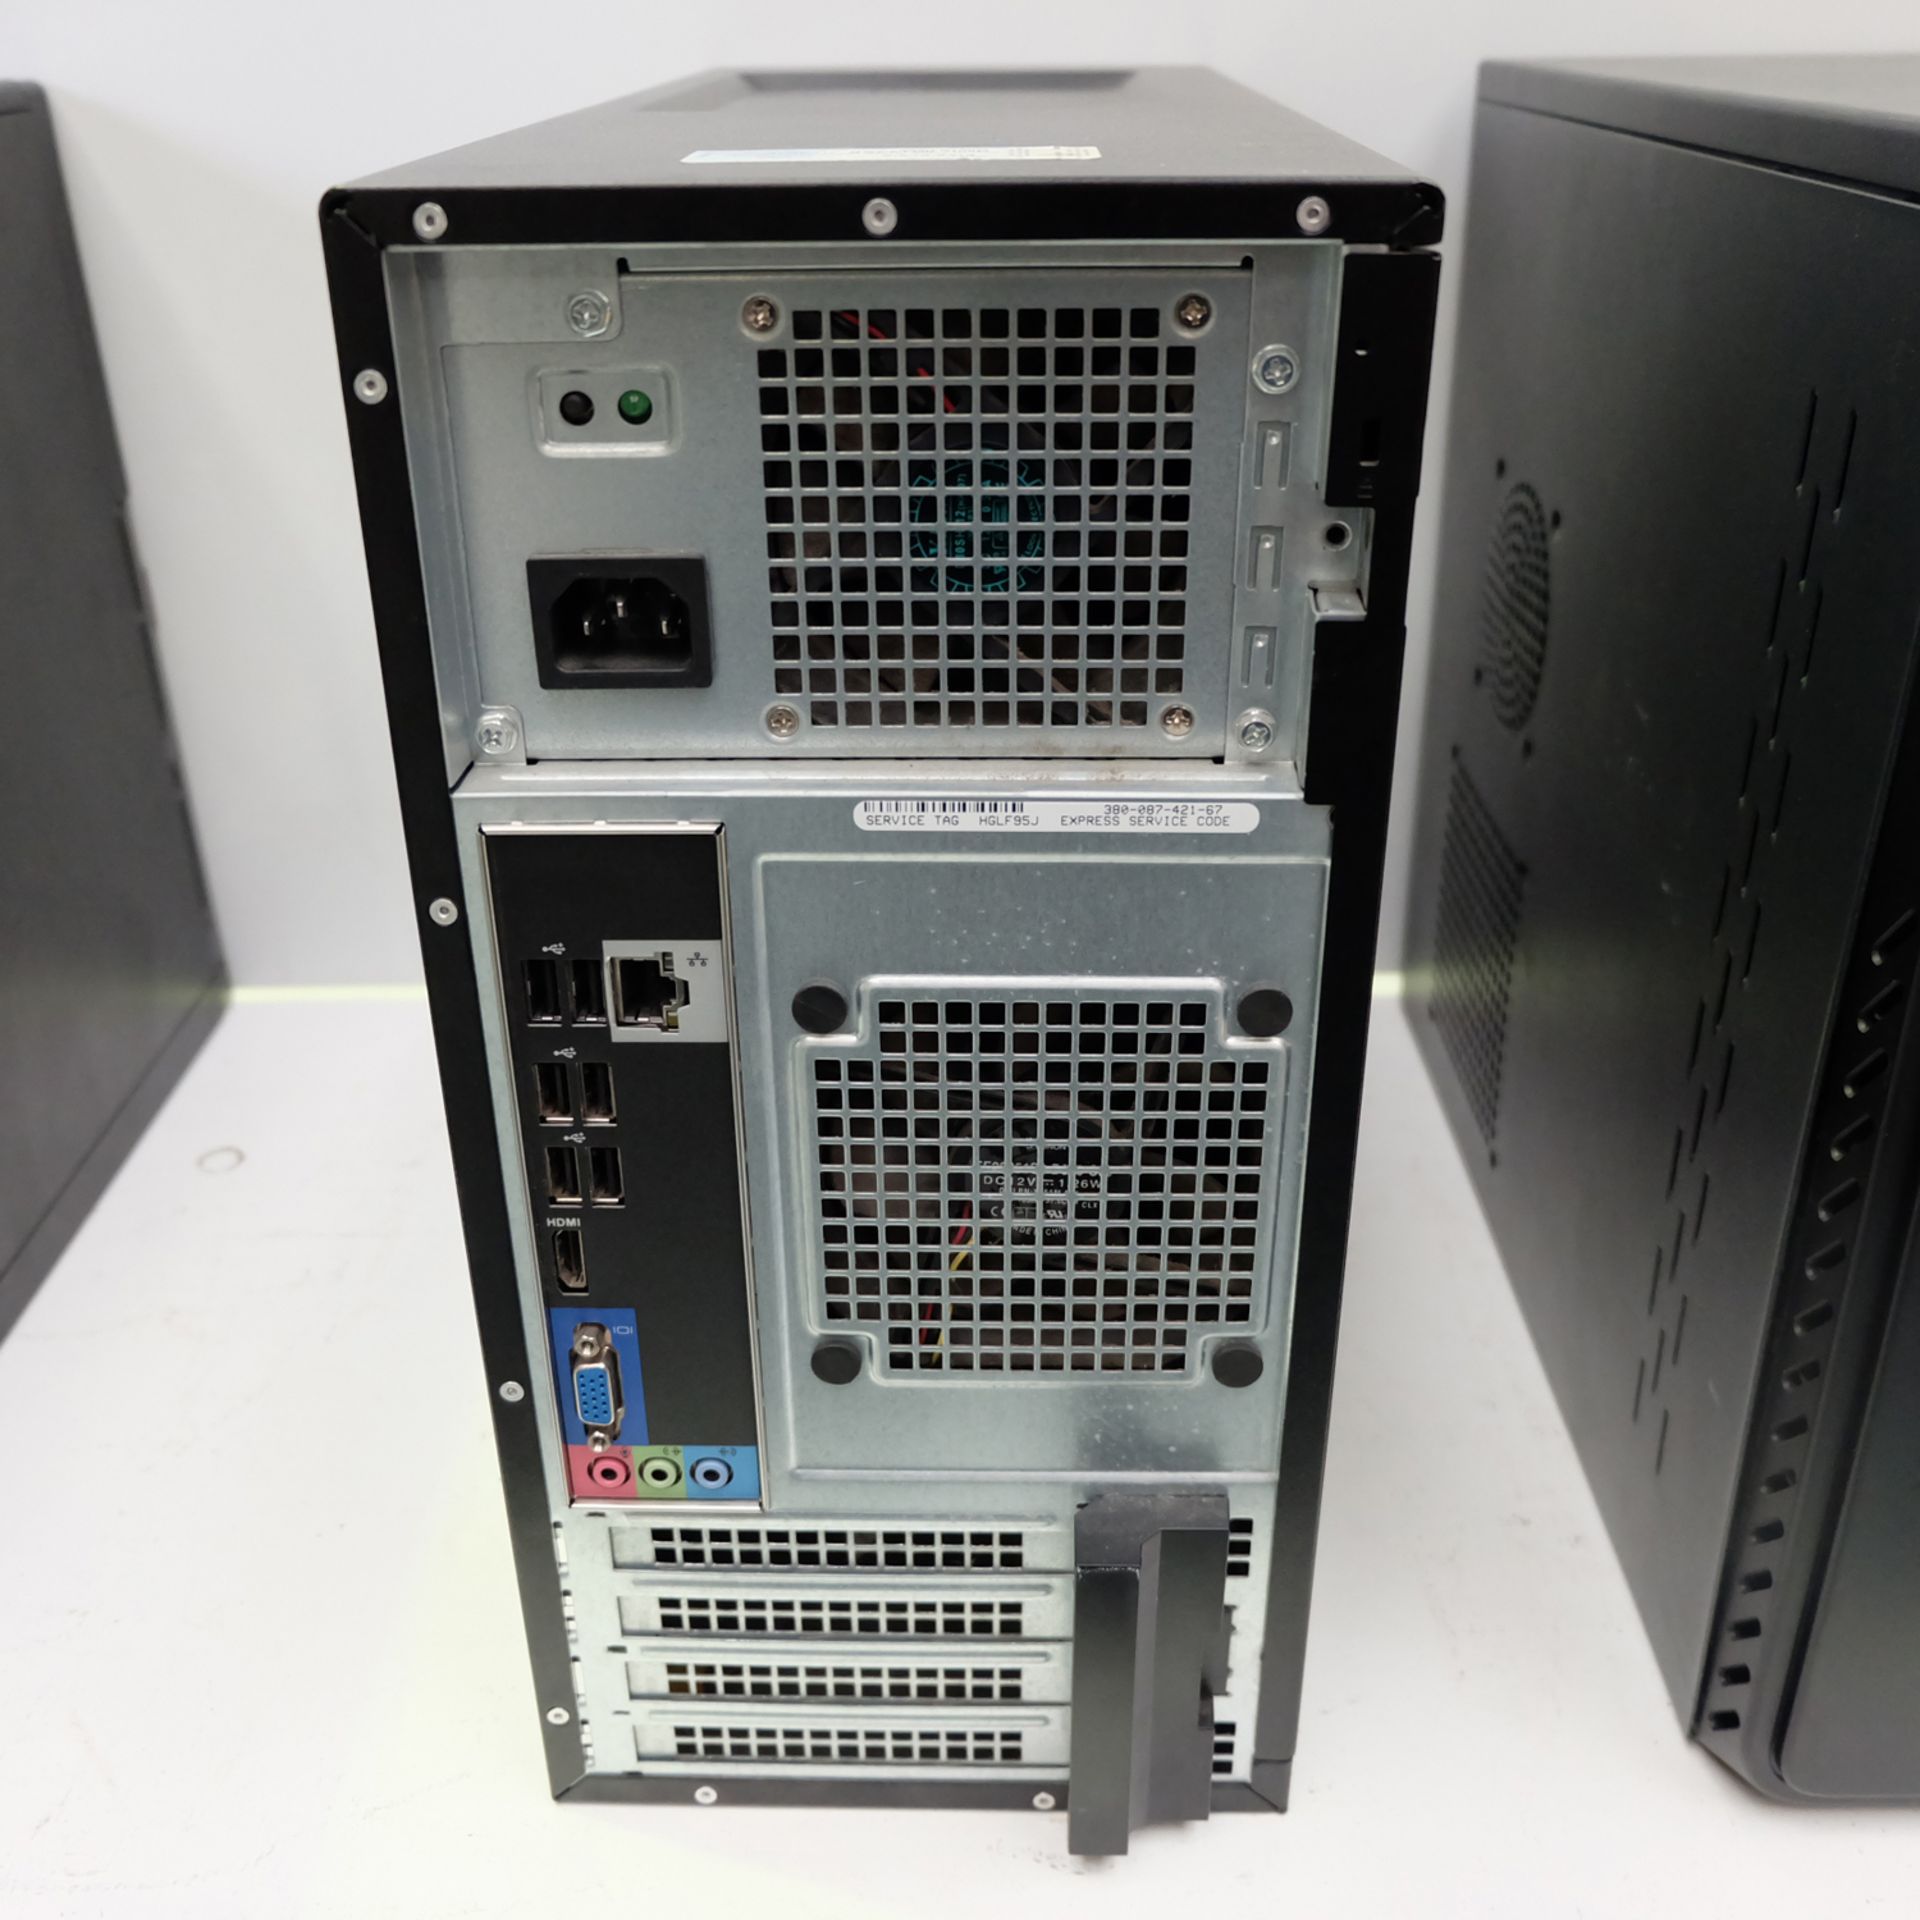 4 x PC Towers. Please Note That the HDDs Have Been Removed. - Image 8 of 9